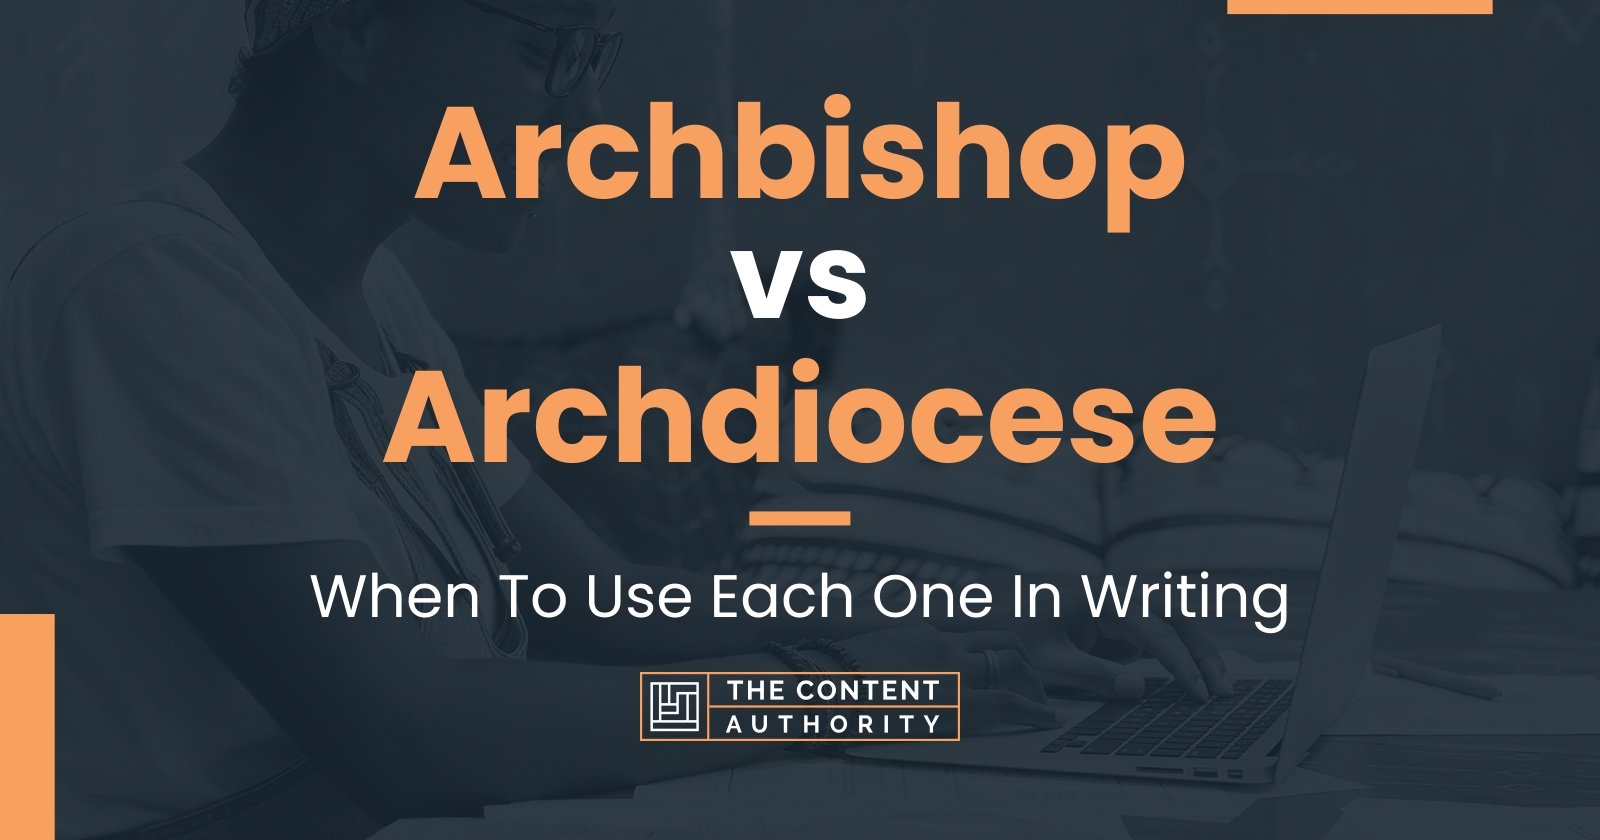 Archbishop vs Archdiocese: When To Use Each One In Writing